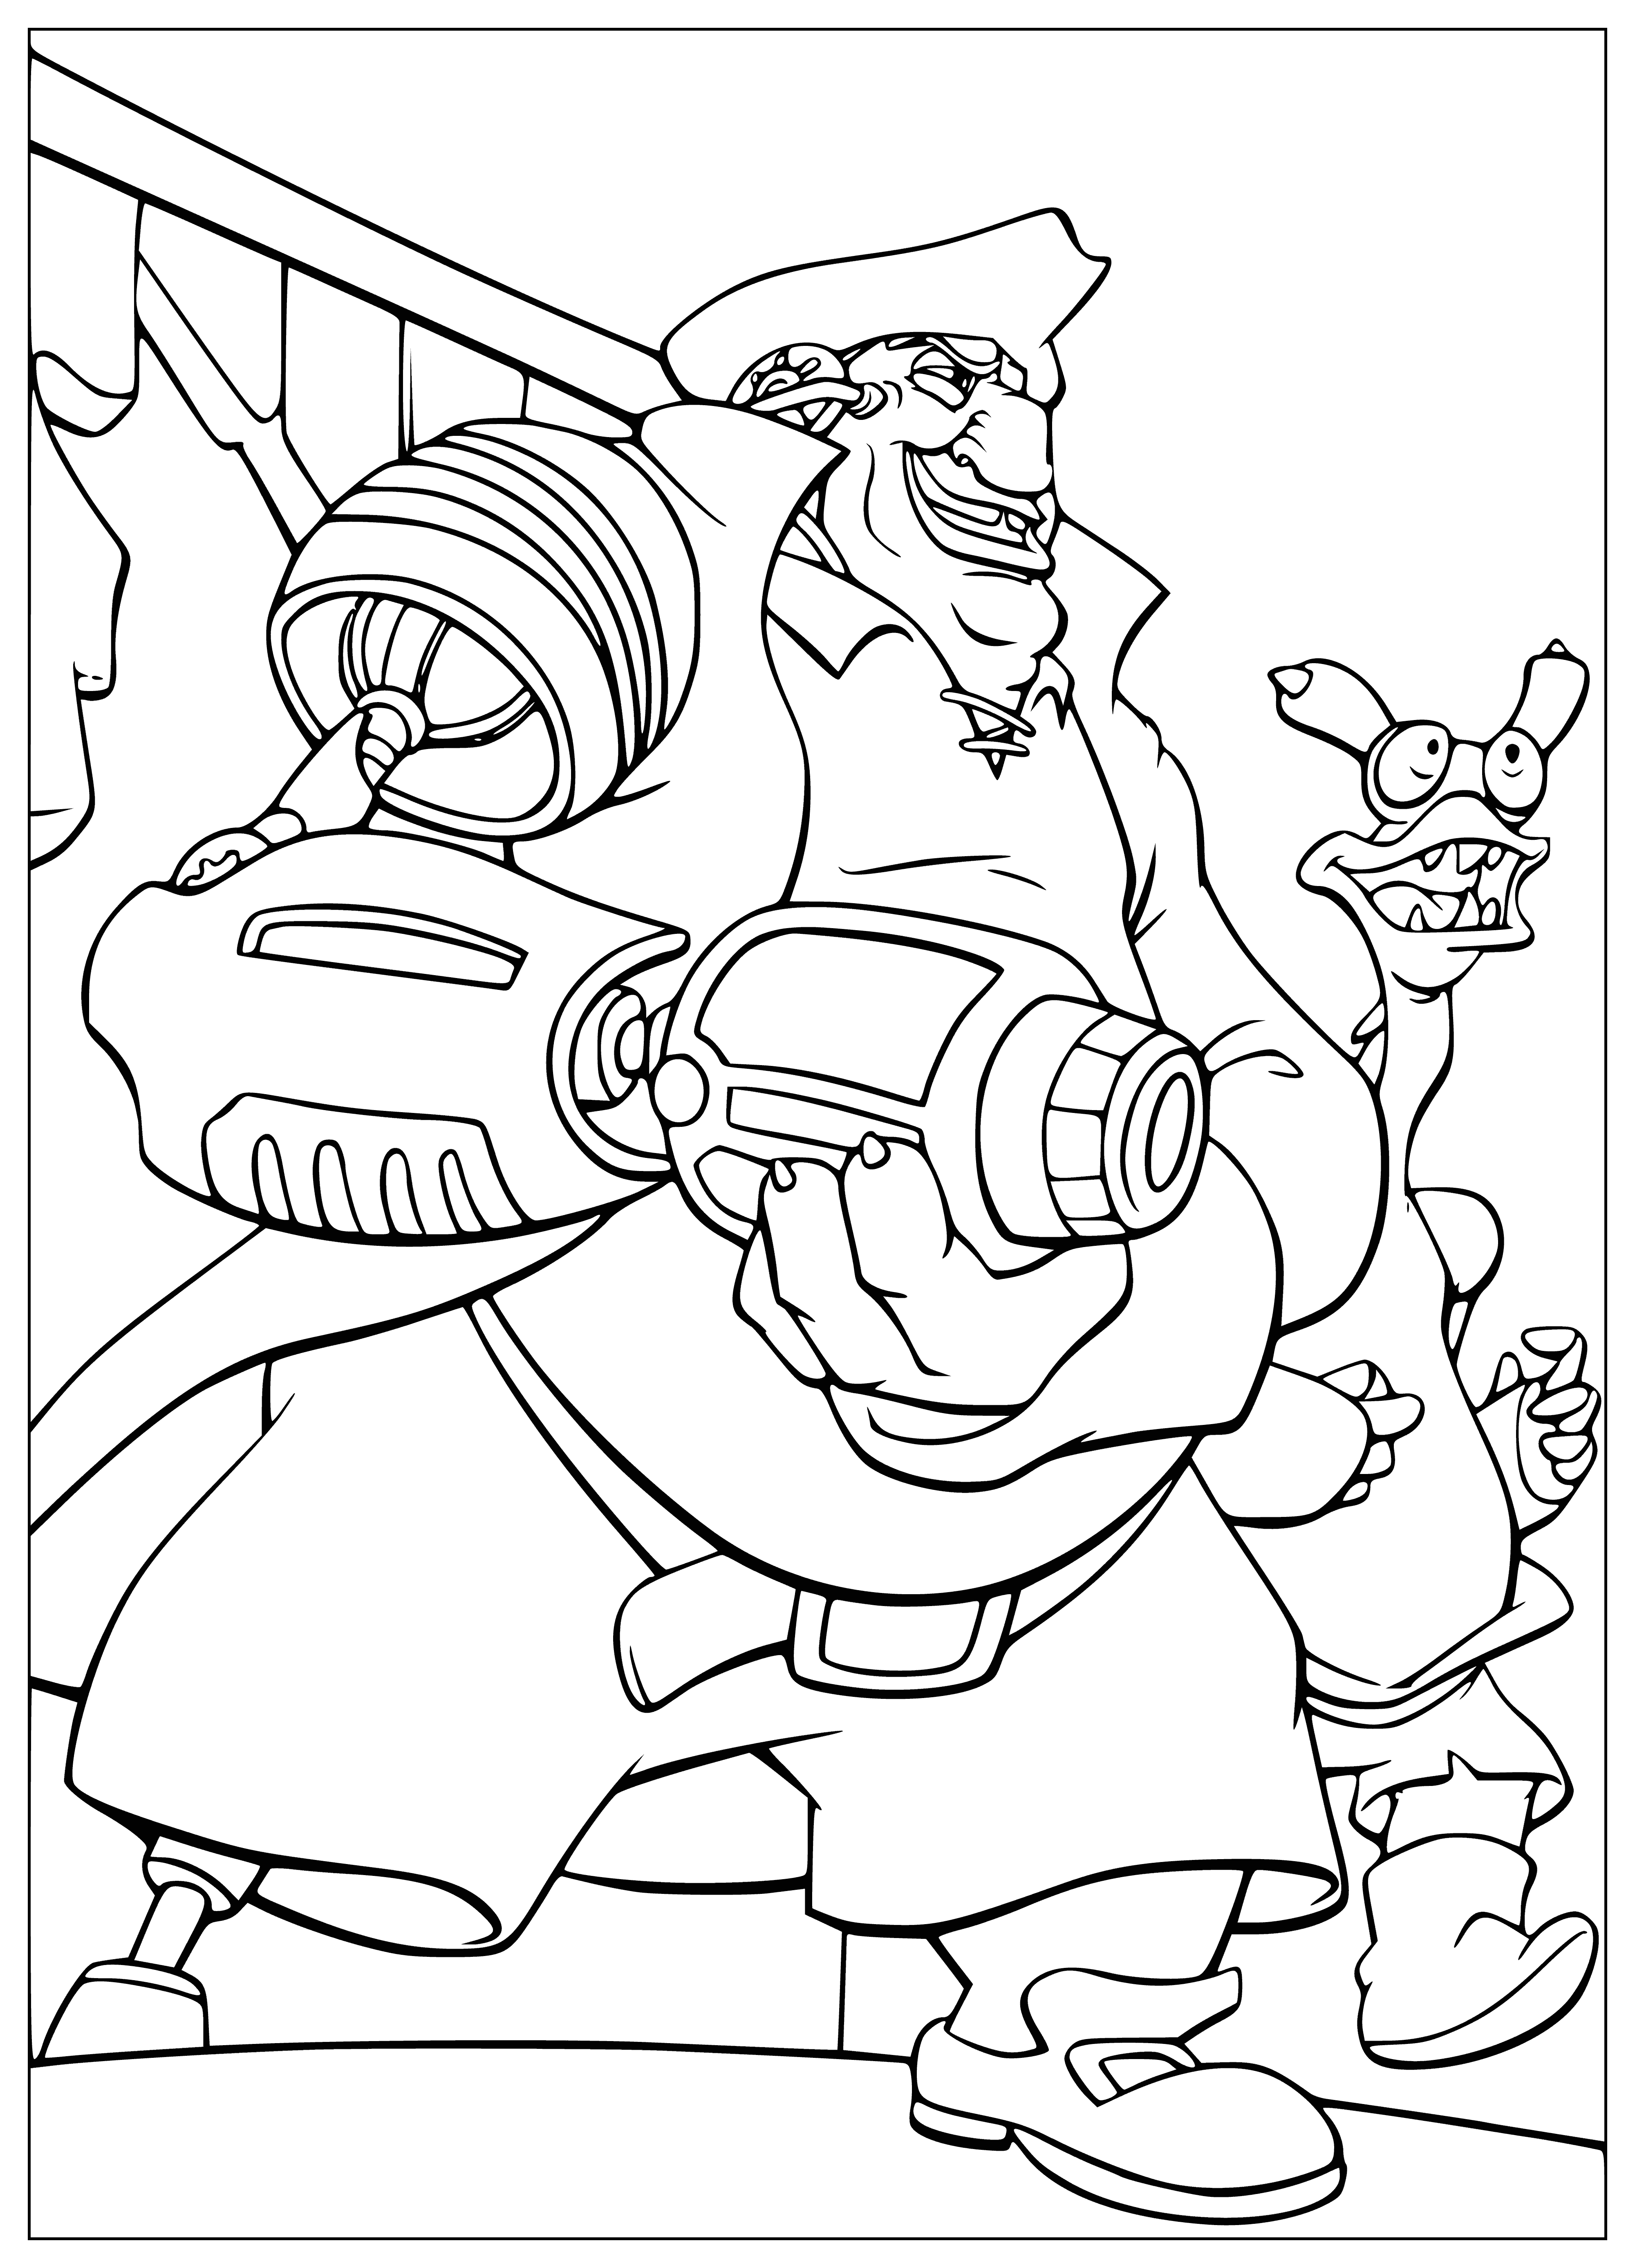 Silver coloring page